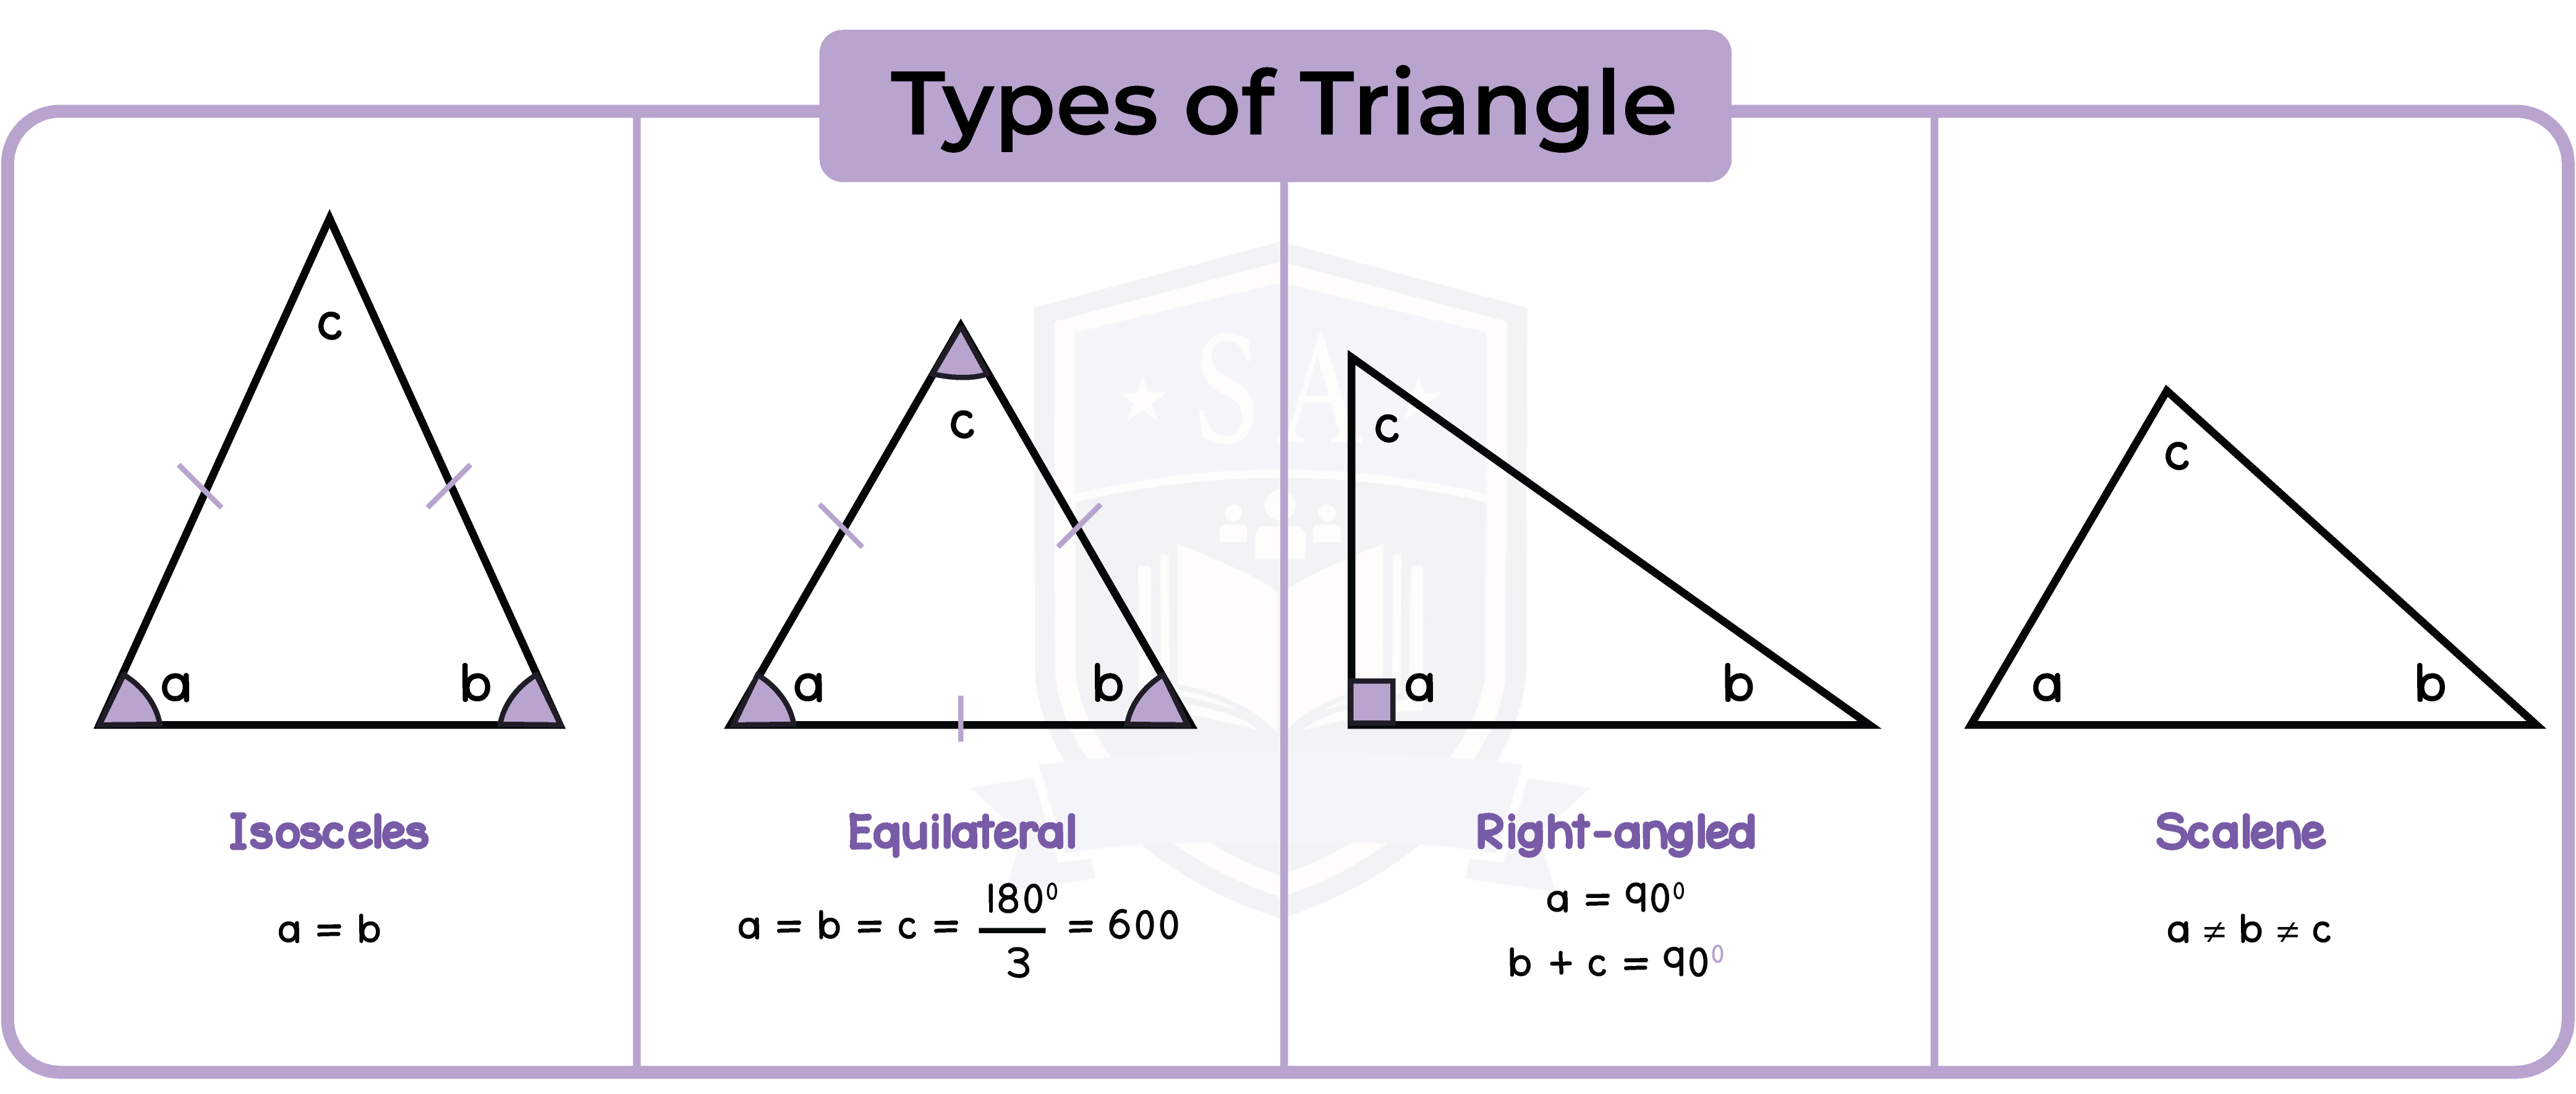 edexcel_igcse_mathematics a_topic 25_angles, lines and triangles_005_Types of Triangle